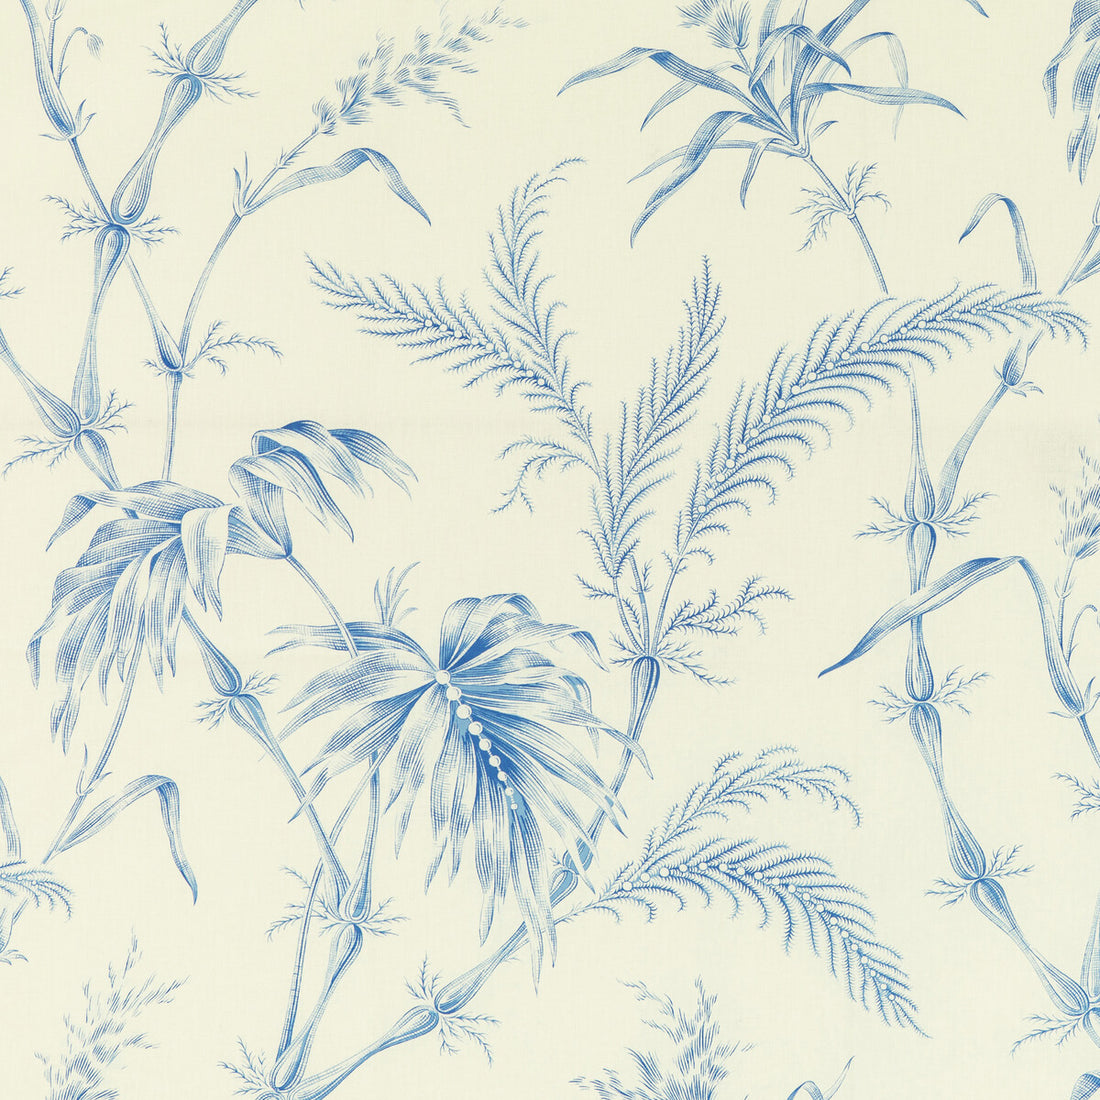 Lauziere Print fabric in blue color - pattern 8020124.5.0 - by Brunschwig &amp; Fils in the Louverne collection